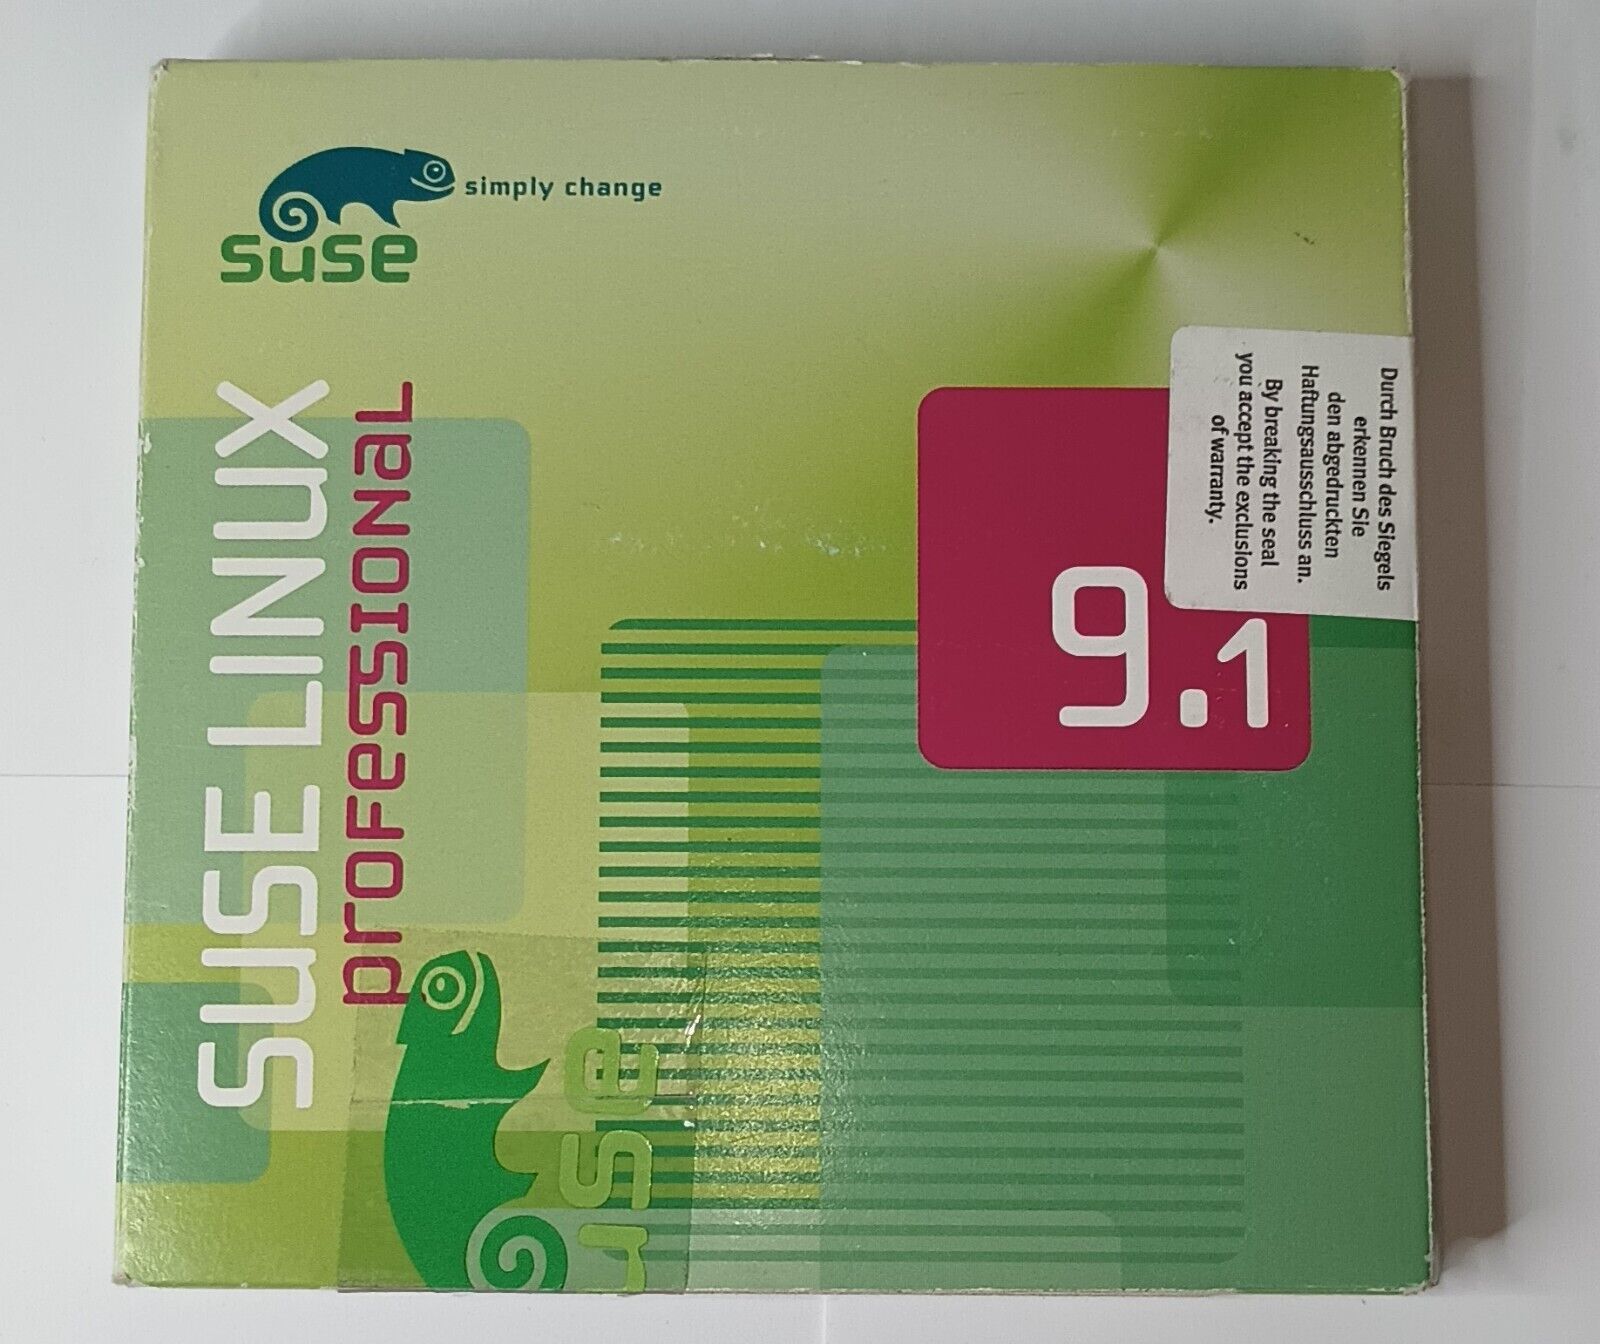 Suse Linux Professional 9.1 Professional Edition Complete Super Clean